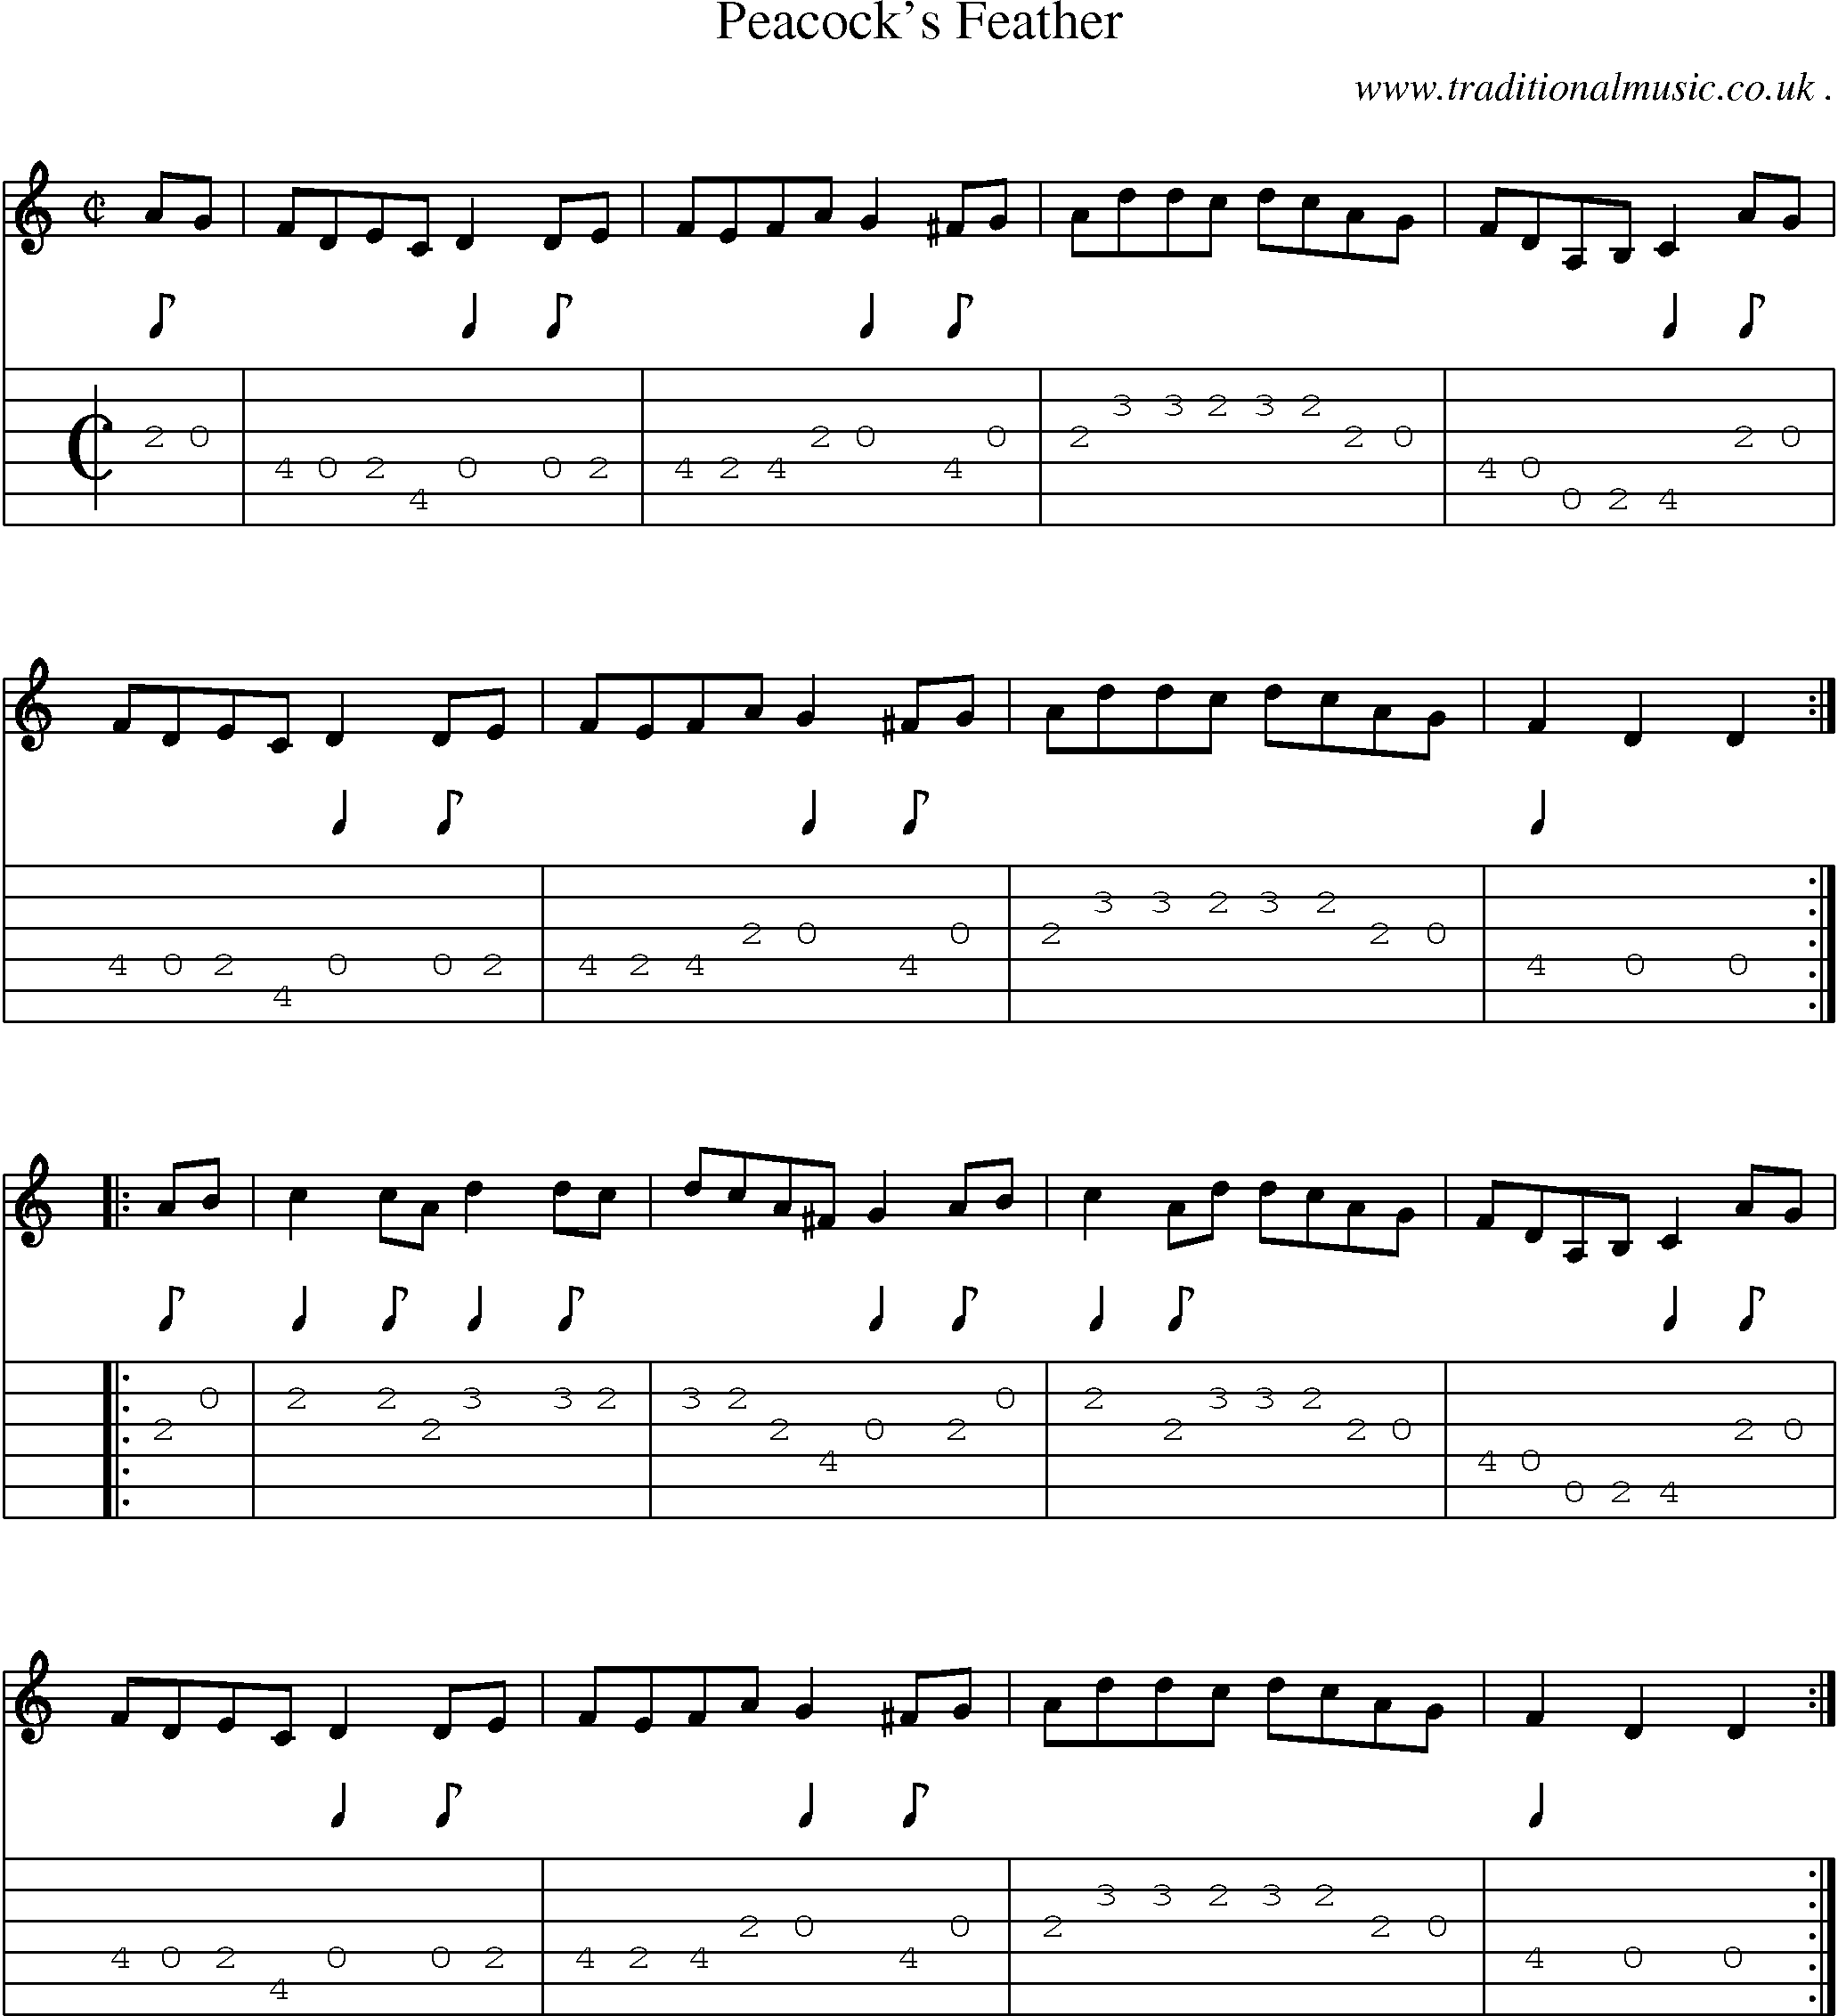 Sheet-Music and Guitar Tabs for Peacocks Feather